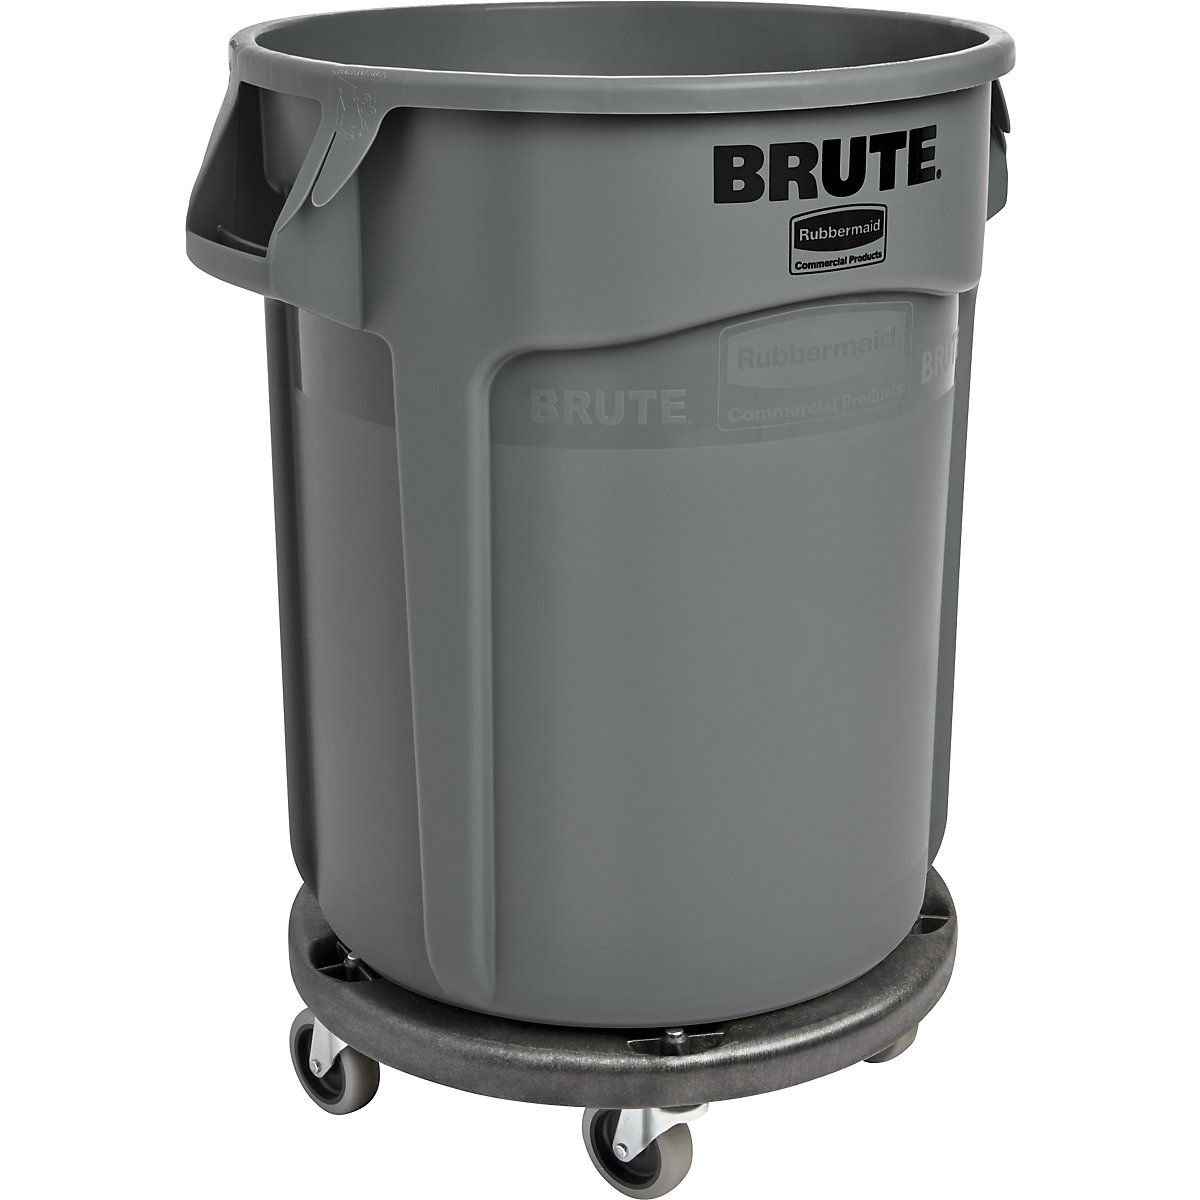 BRUTE® universal container with trolley - Rubbermaid